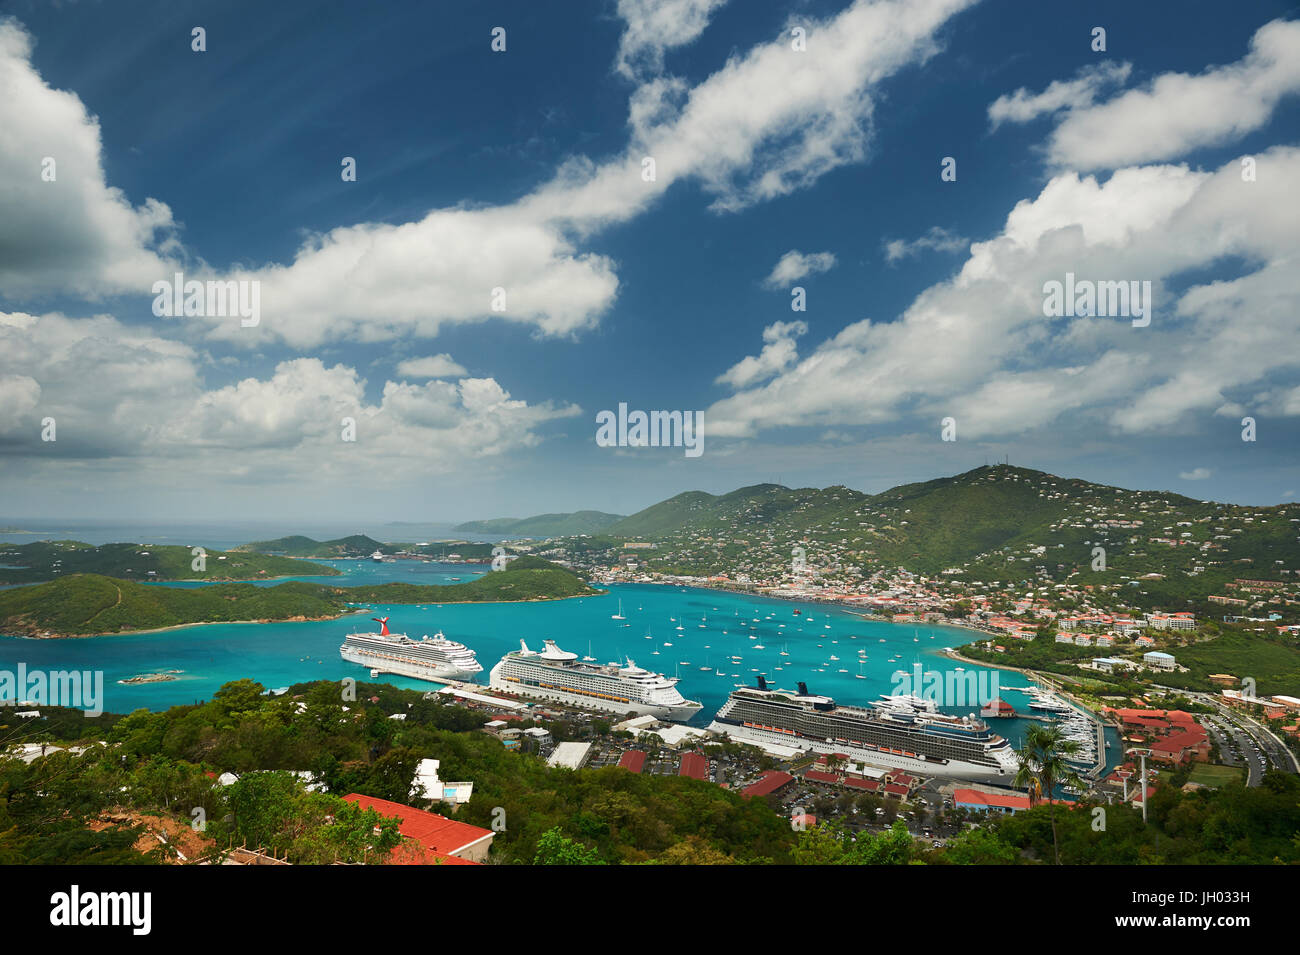 Caribbean cruise theme. Caribbean blue bay aerial view with cruise ships Stock Photo